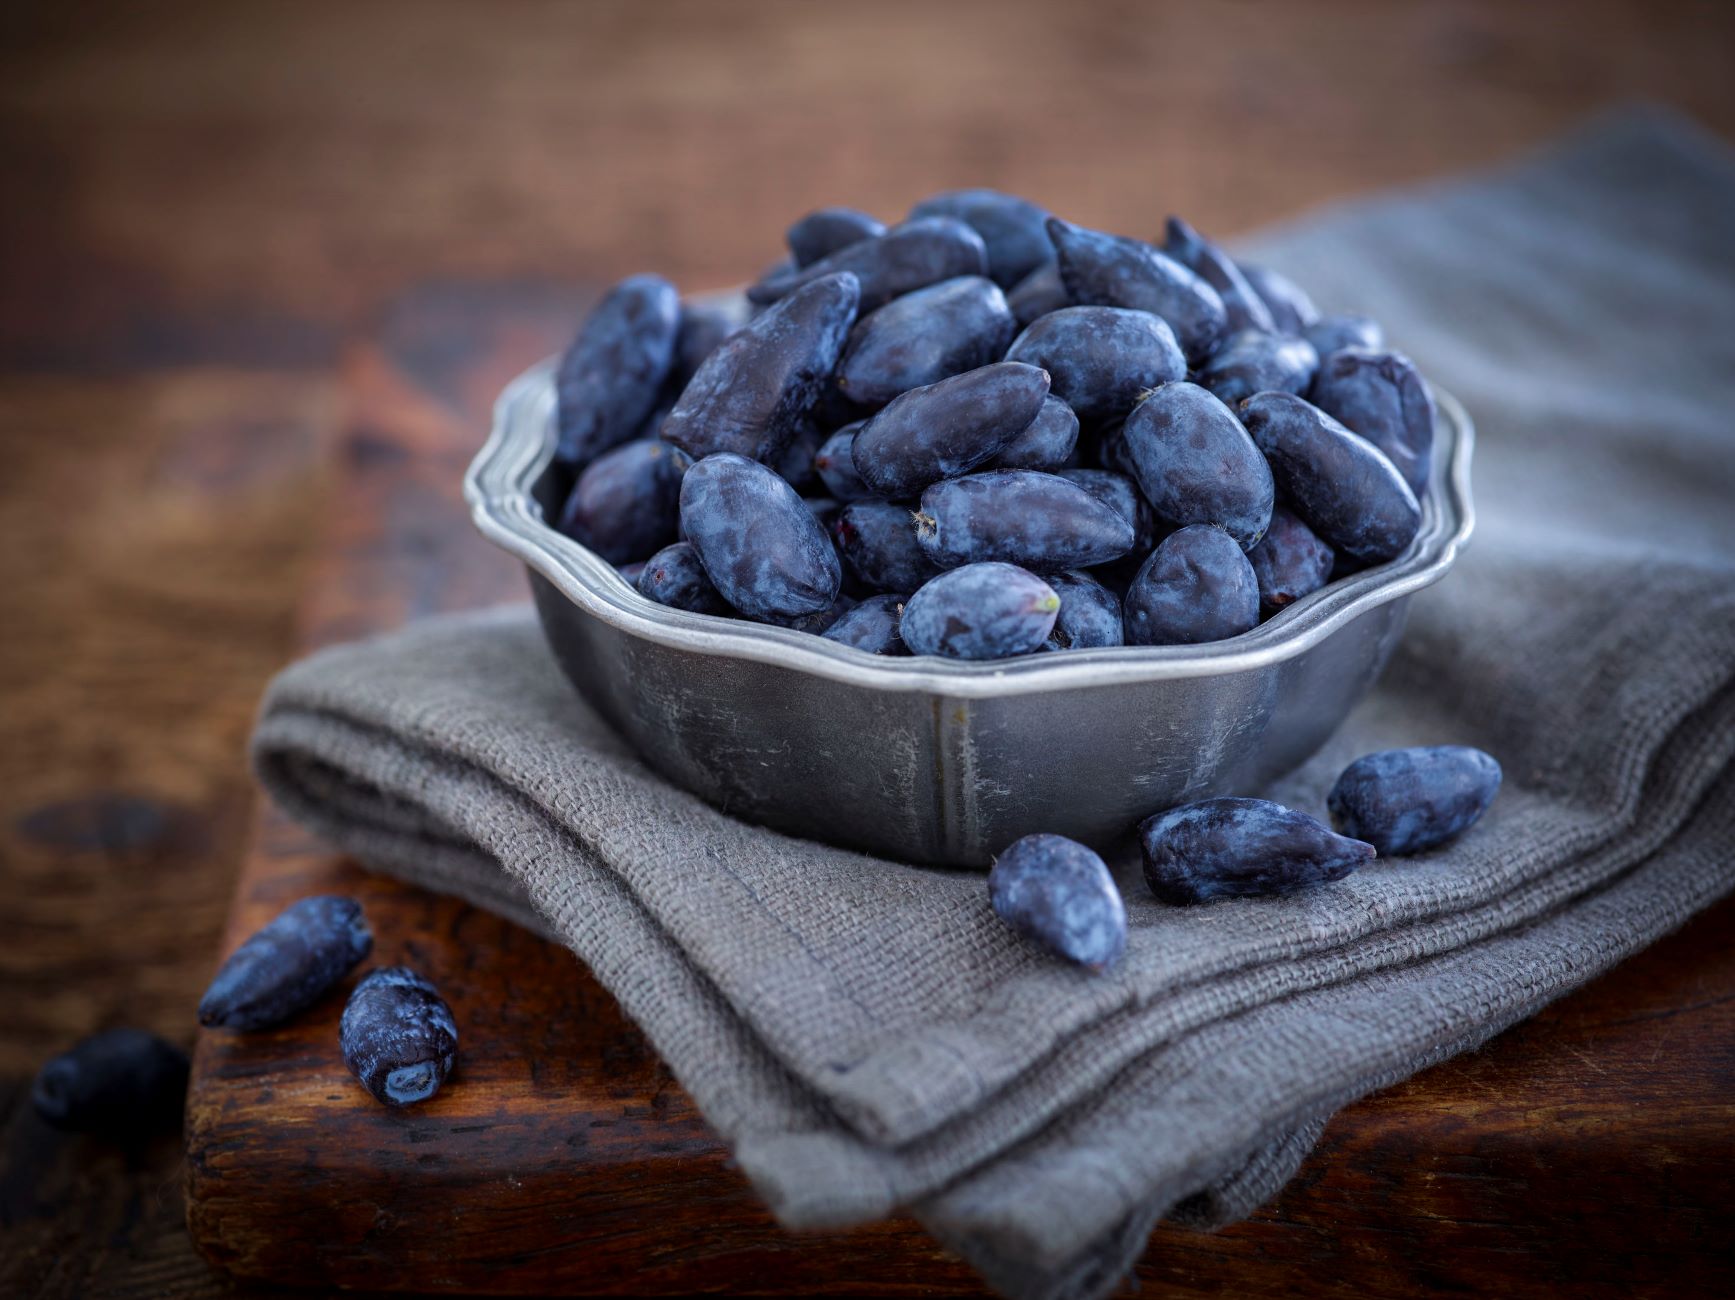 Haskap Berries: The Superfood That Can Boost Running Performance By 2%